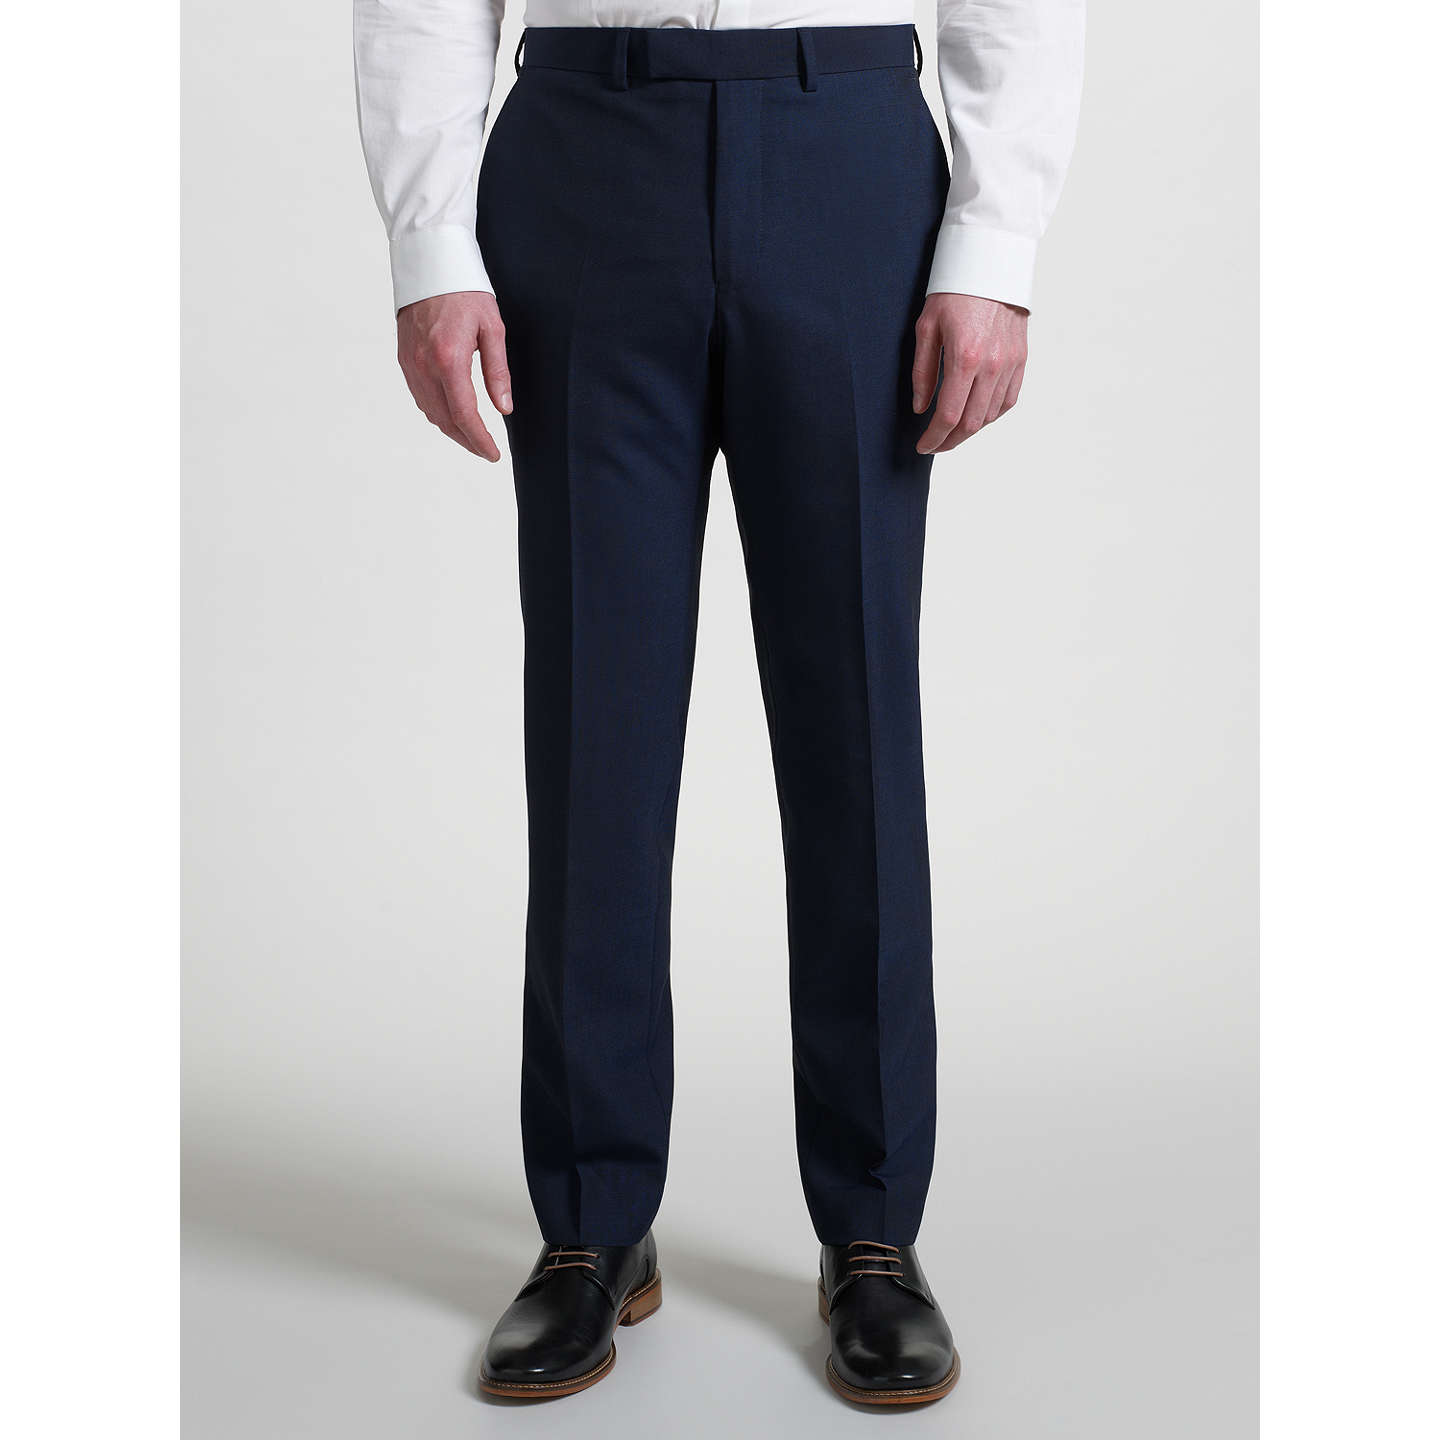 Kin by John Lewis Stamford Tonic Slim Fit Suit Trousers, Midnight Blue ...